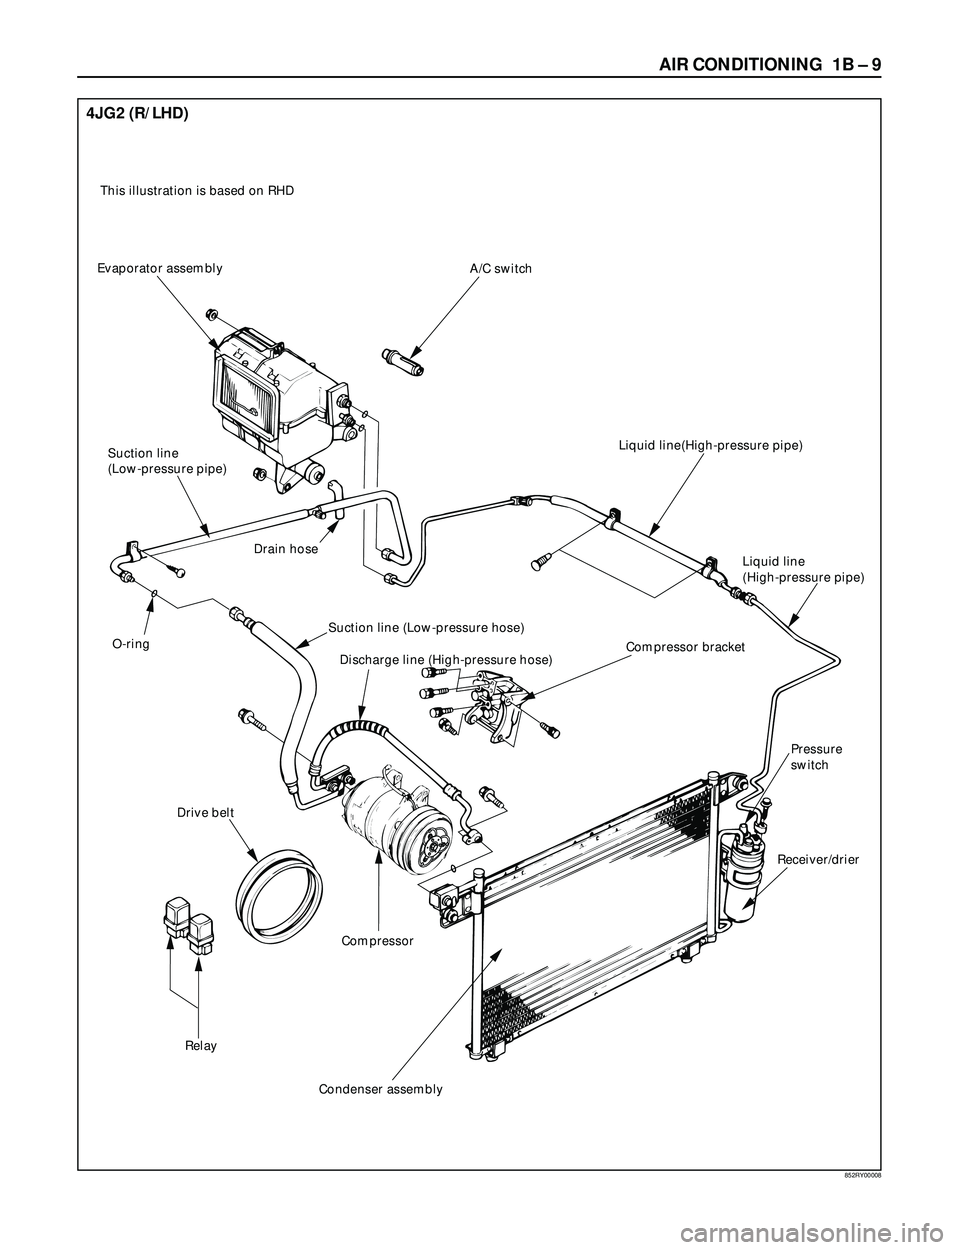 ISUZU TROOPER 1998  Service Repair Manual AIR CONDITIONING  1B Ð 9
852RY00008
This illustration is based on RHD
A/C switch
Drain hose
Suction line (Low-pressure hose)
Discharge line (High-pressure hose)Compressor bracket
Pressure
switch
Rece